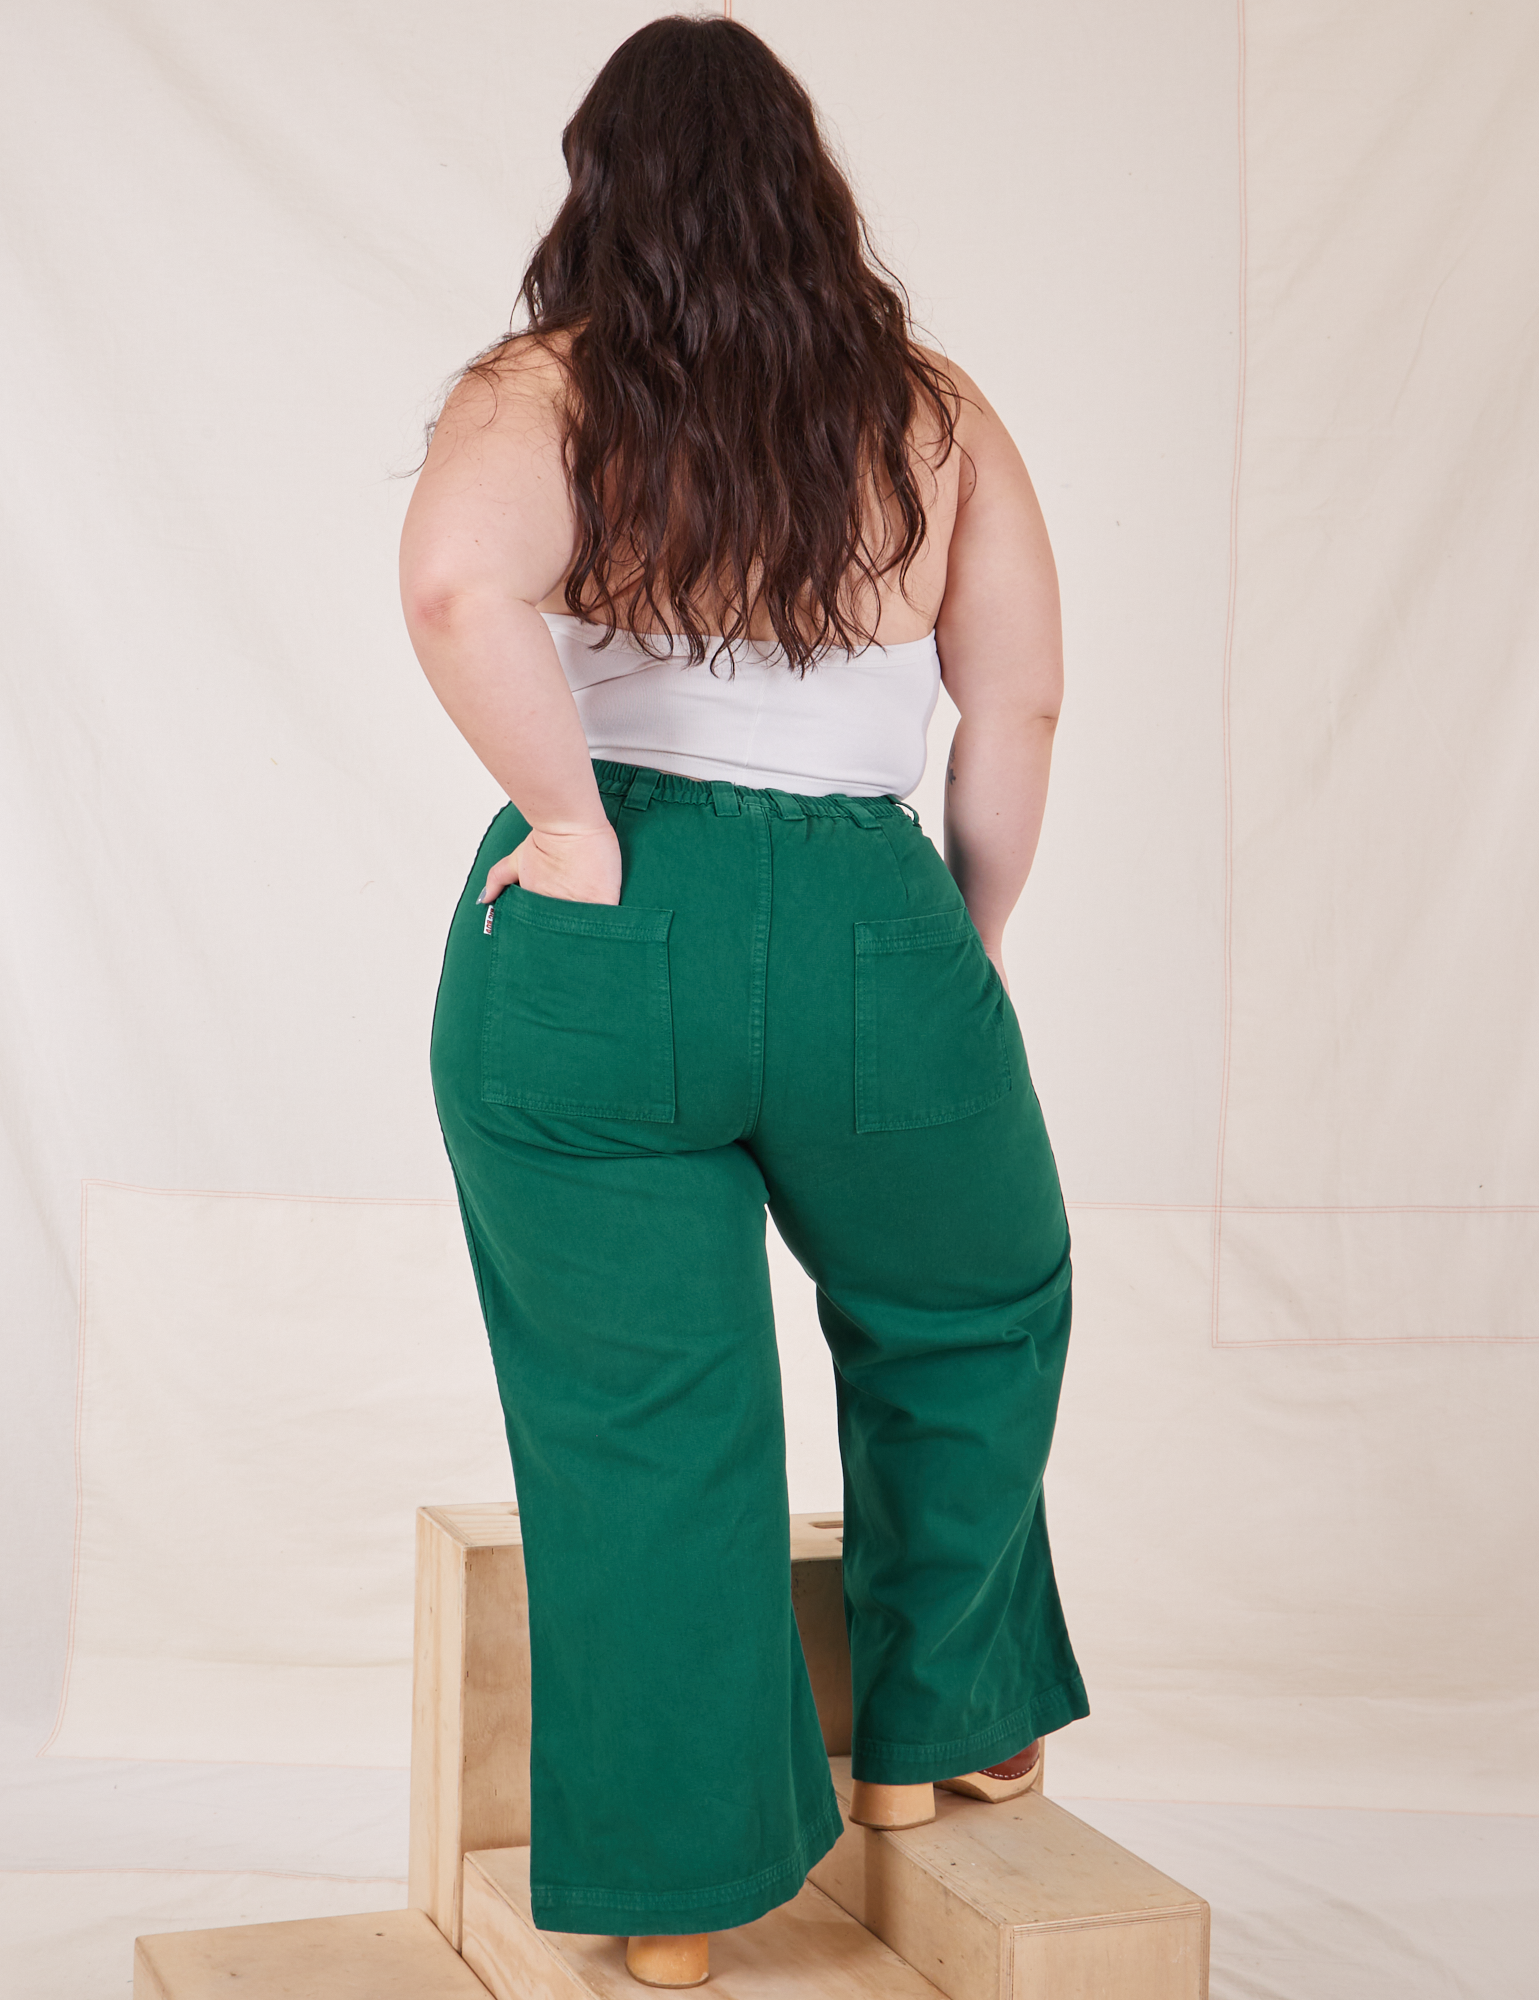 Back view of Bell Bottoms in Hunter Green worn by Ashley. She has one hand in the pocket.